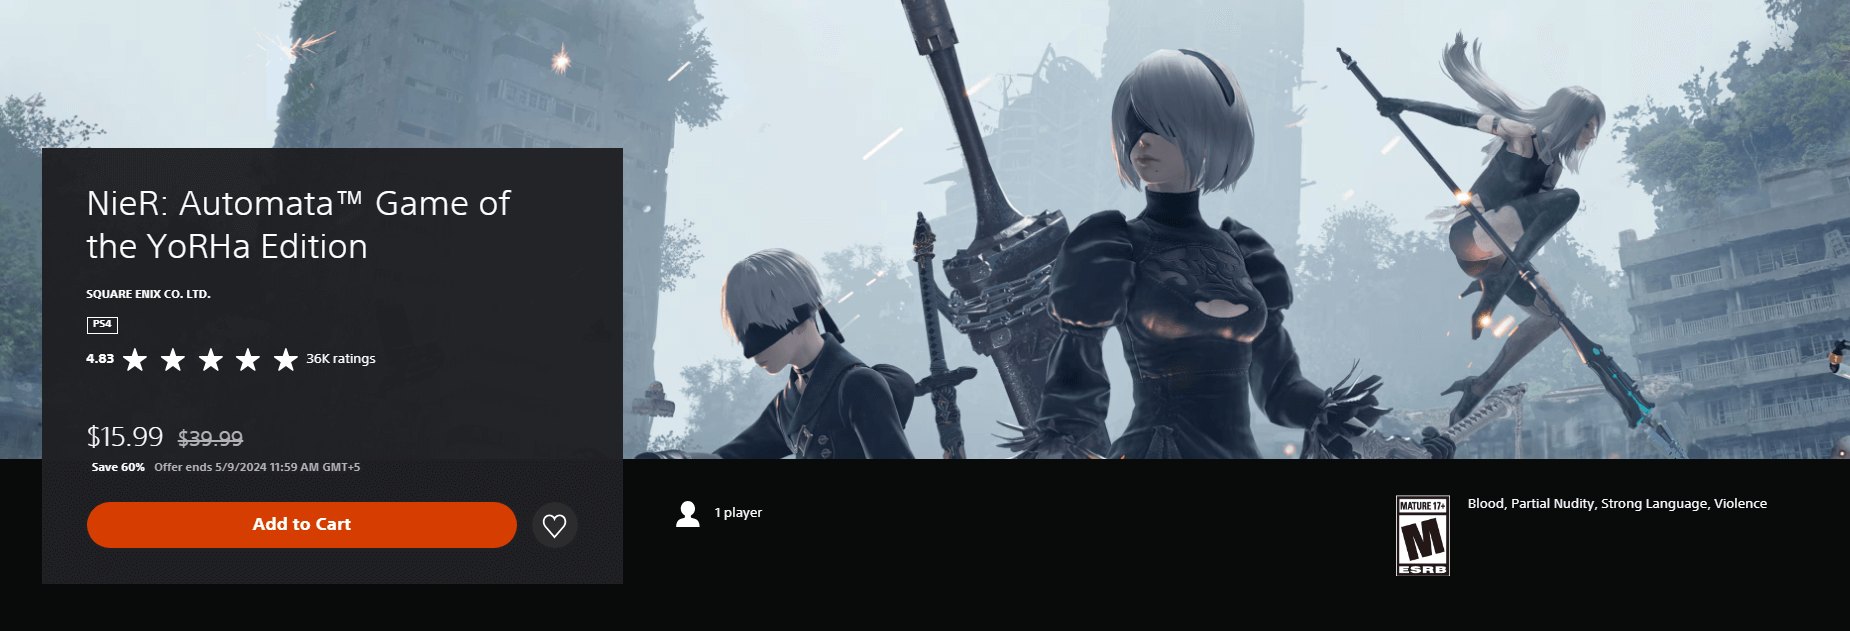 Nier: Automata Game of the YoRHa Edition on Sale at the Moment